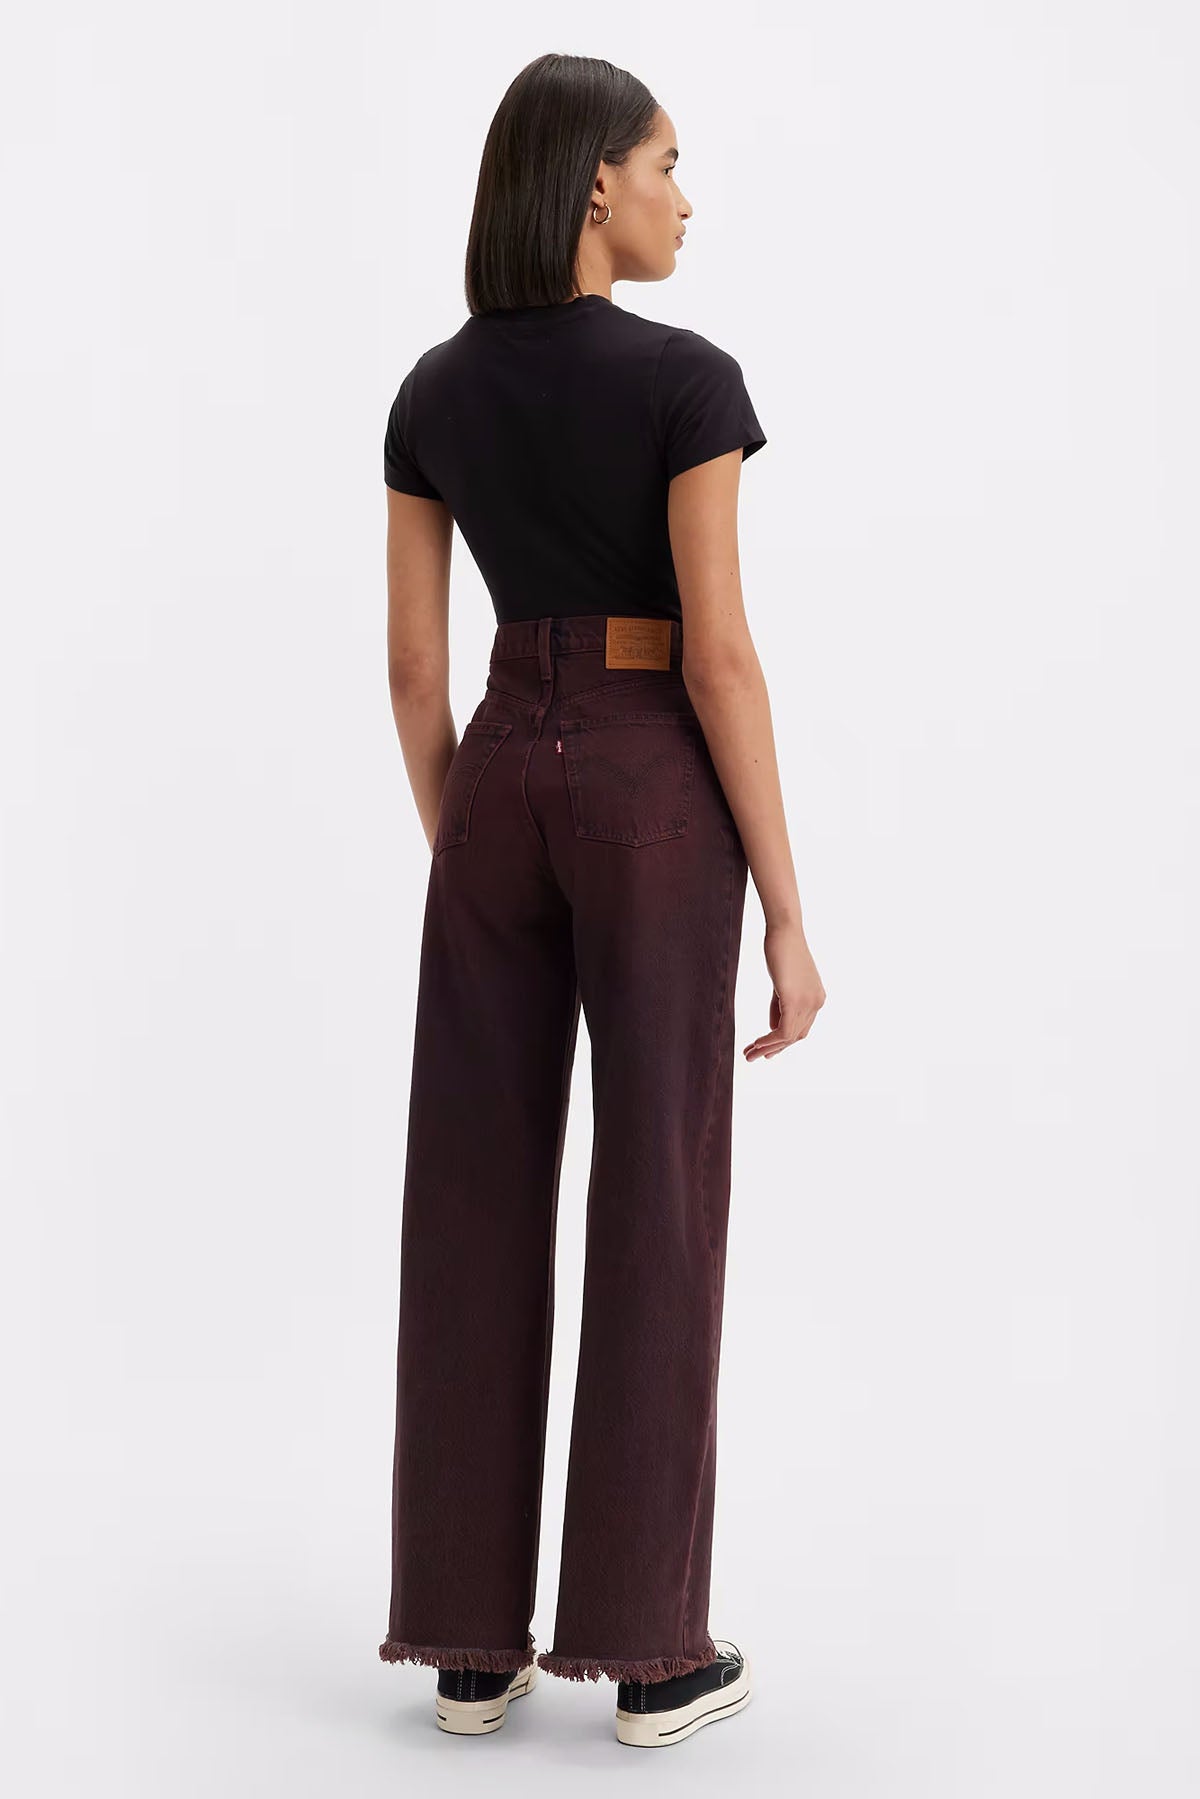 Levis - Ribcage Wide Leg - Cherry Cordial  - Back